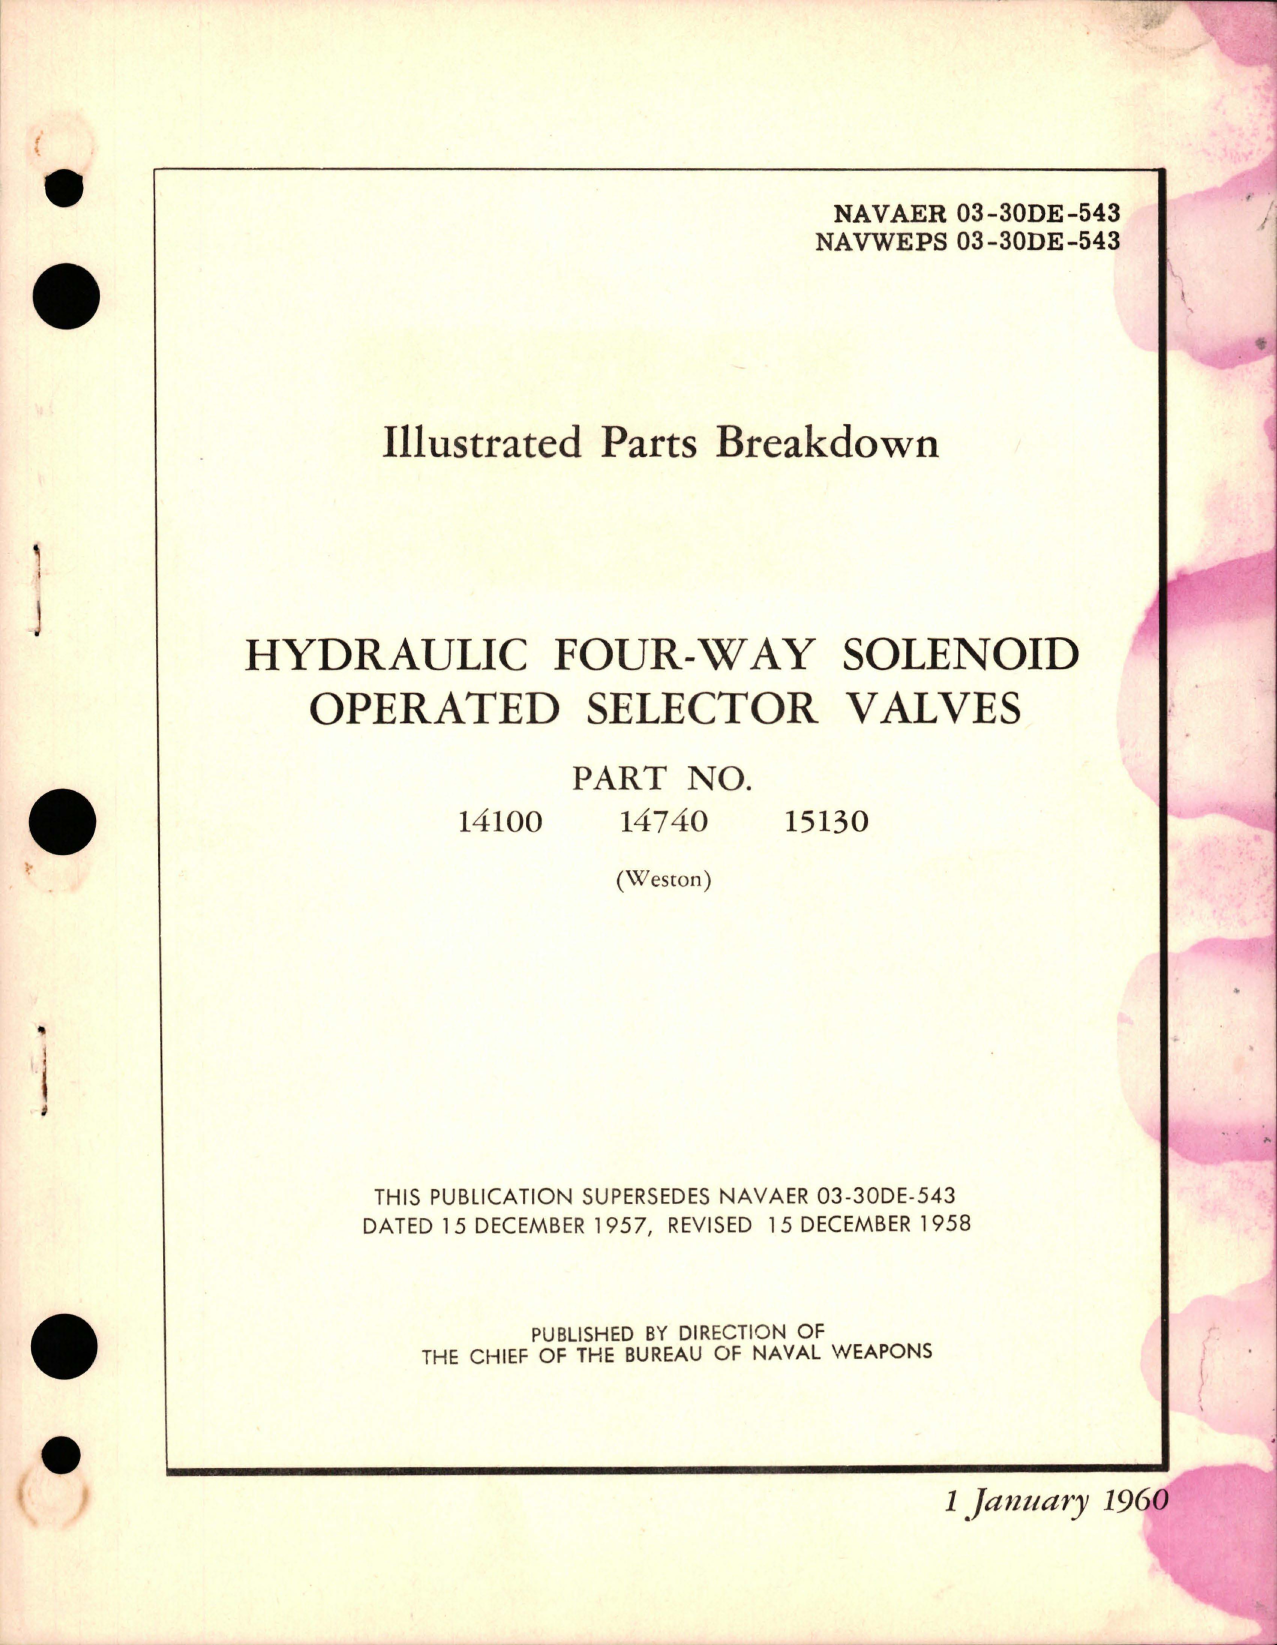 Sample page 1 from AirCorps Library document: Illustrated Parts Breakdown for Hydraulic Four-Way Solenoid Operated Selector Valves - Parts 14100, 14740, and 15130